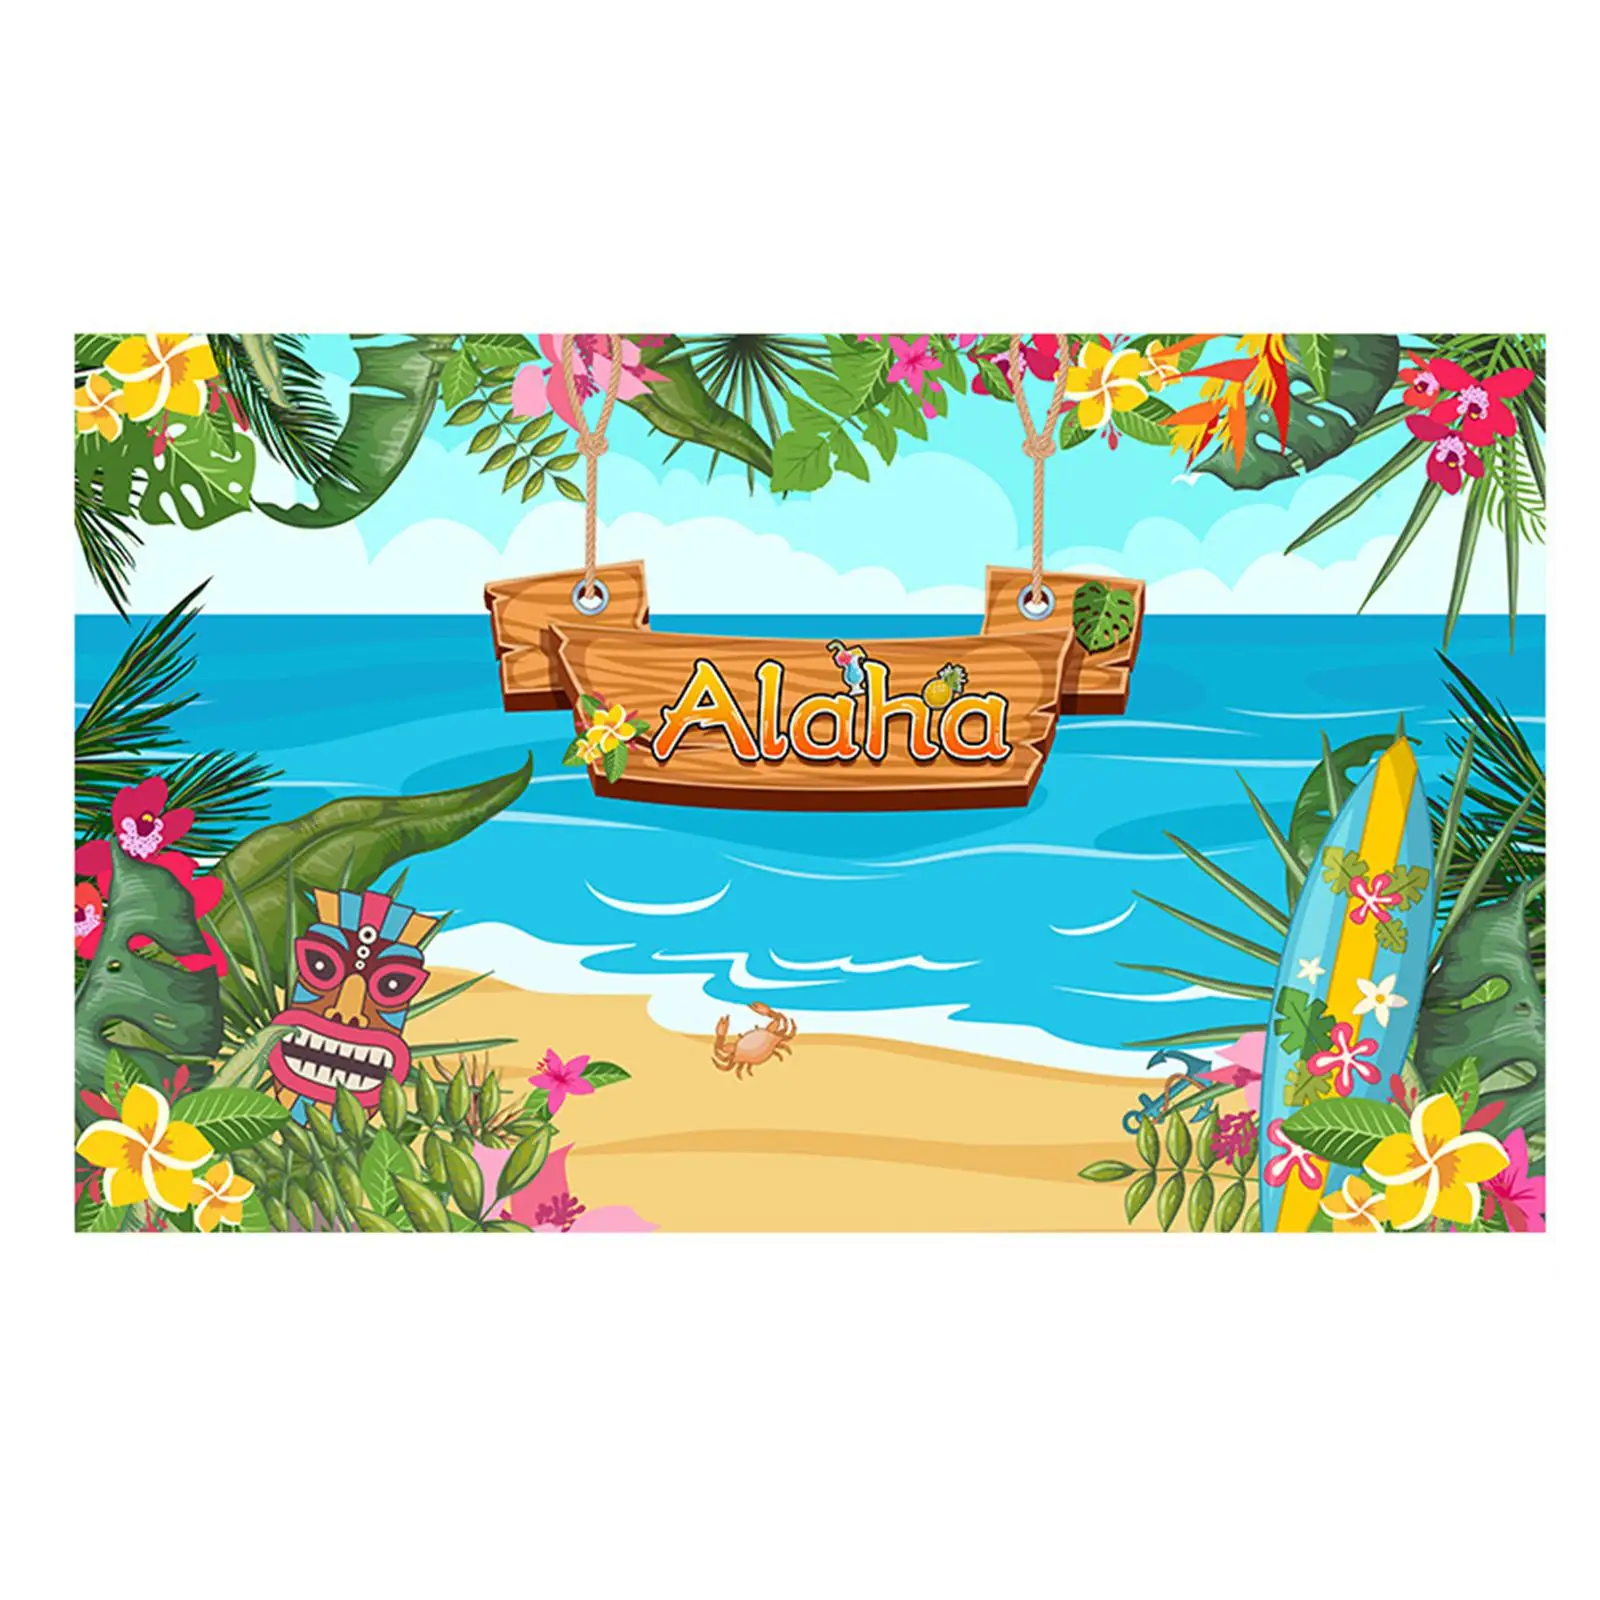 Backdrop 6Ftx3.6ft Tropical Sea Beach Background Washable Seamless Photo Studio Props Easy Handling Tablecloth Light Weight